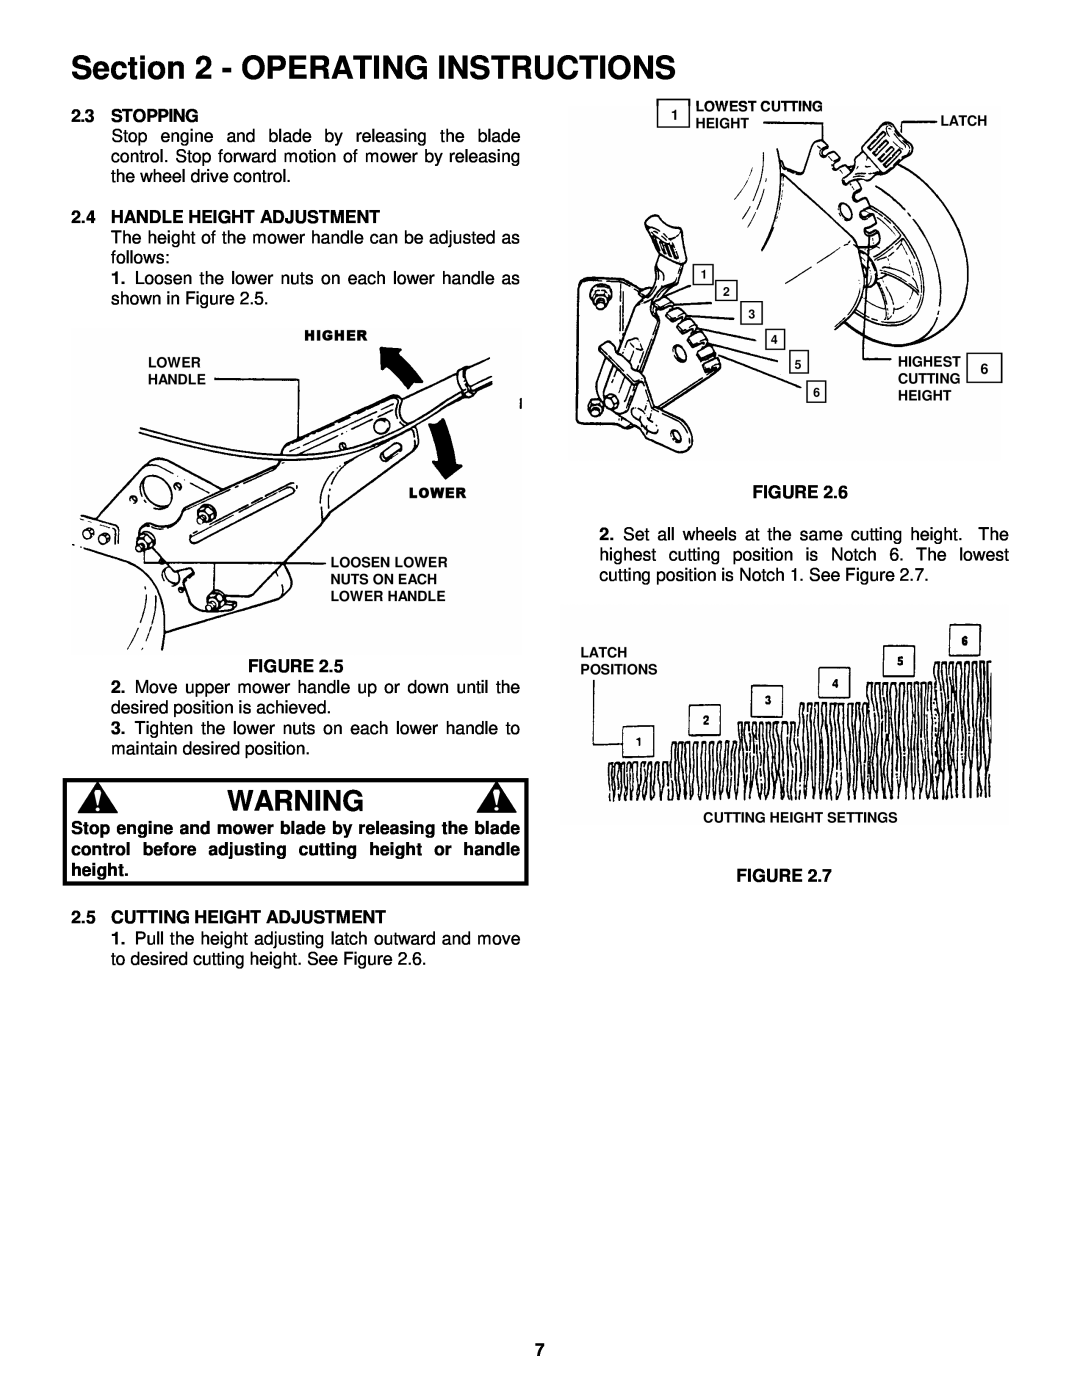 Snapper 215015 Operating Instructions, Stopping, Handle Height Adjustment, Cutting Height Adjustment 